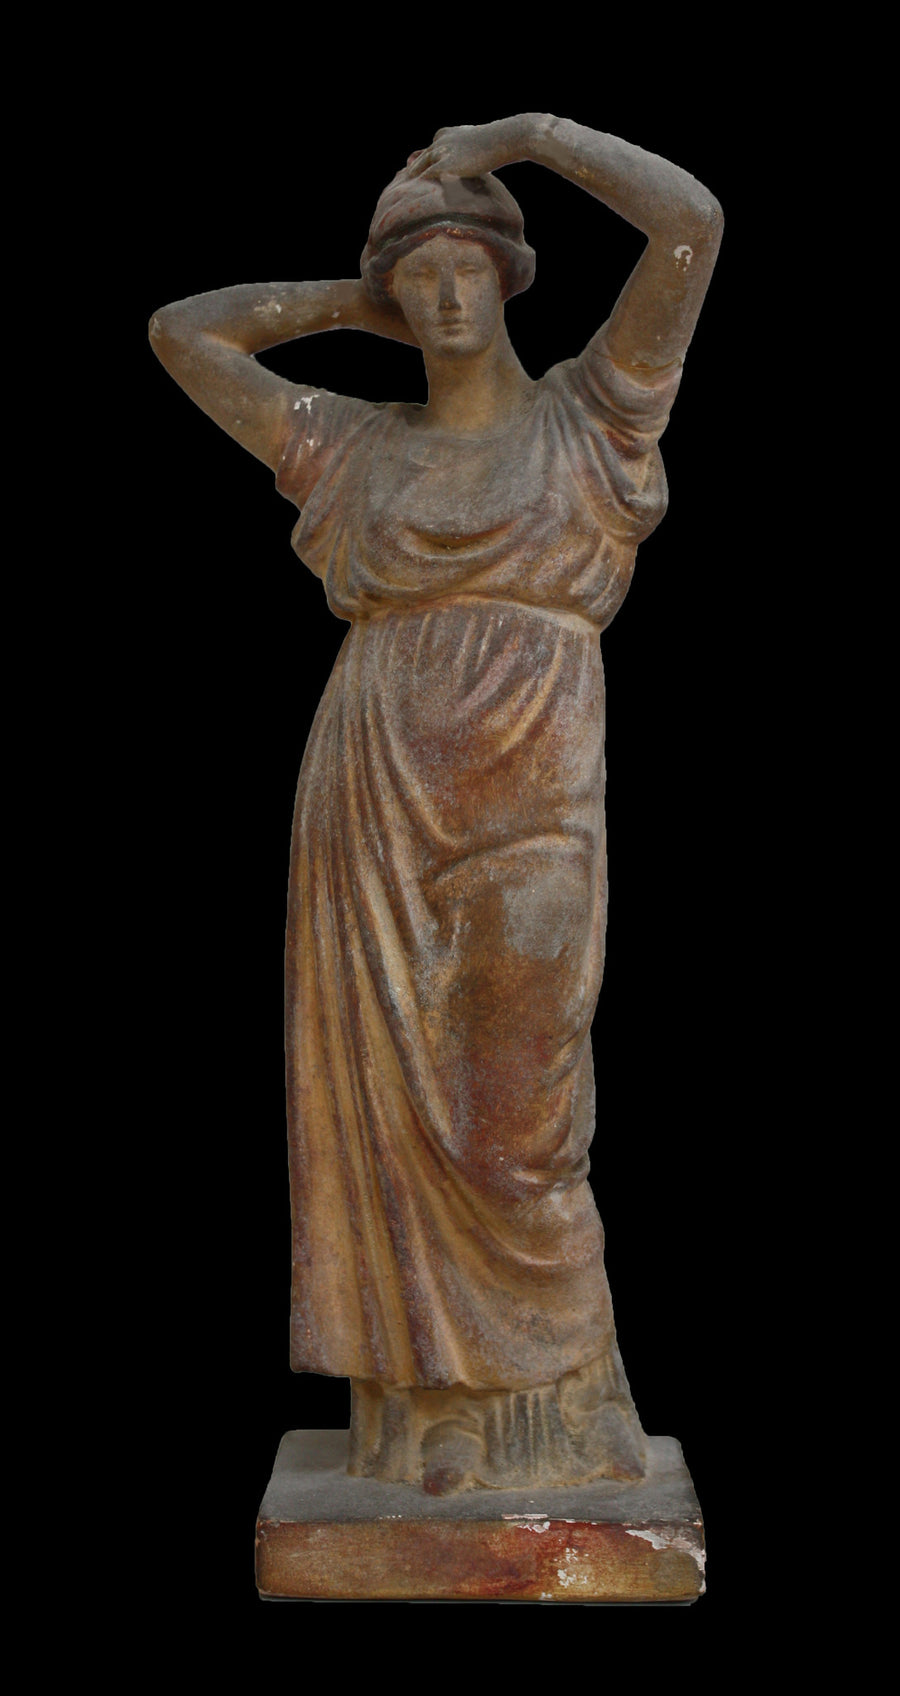 photo of plaster cast statue of a female in pink-orange tinted robes with her arms raised to her head against black background